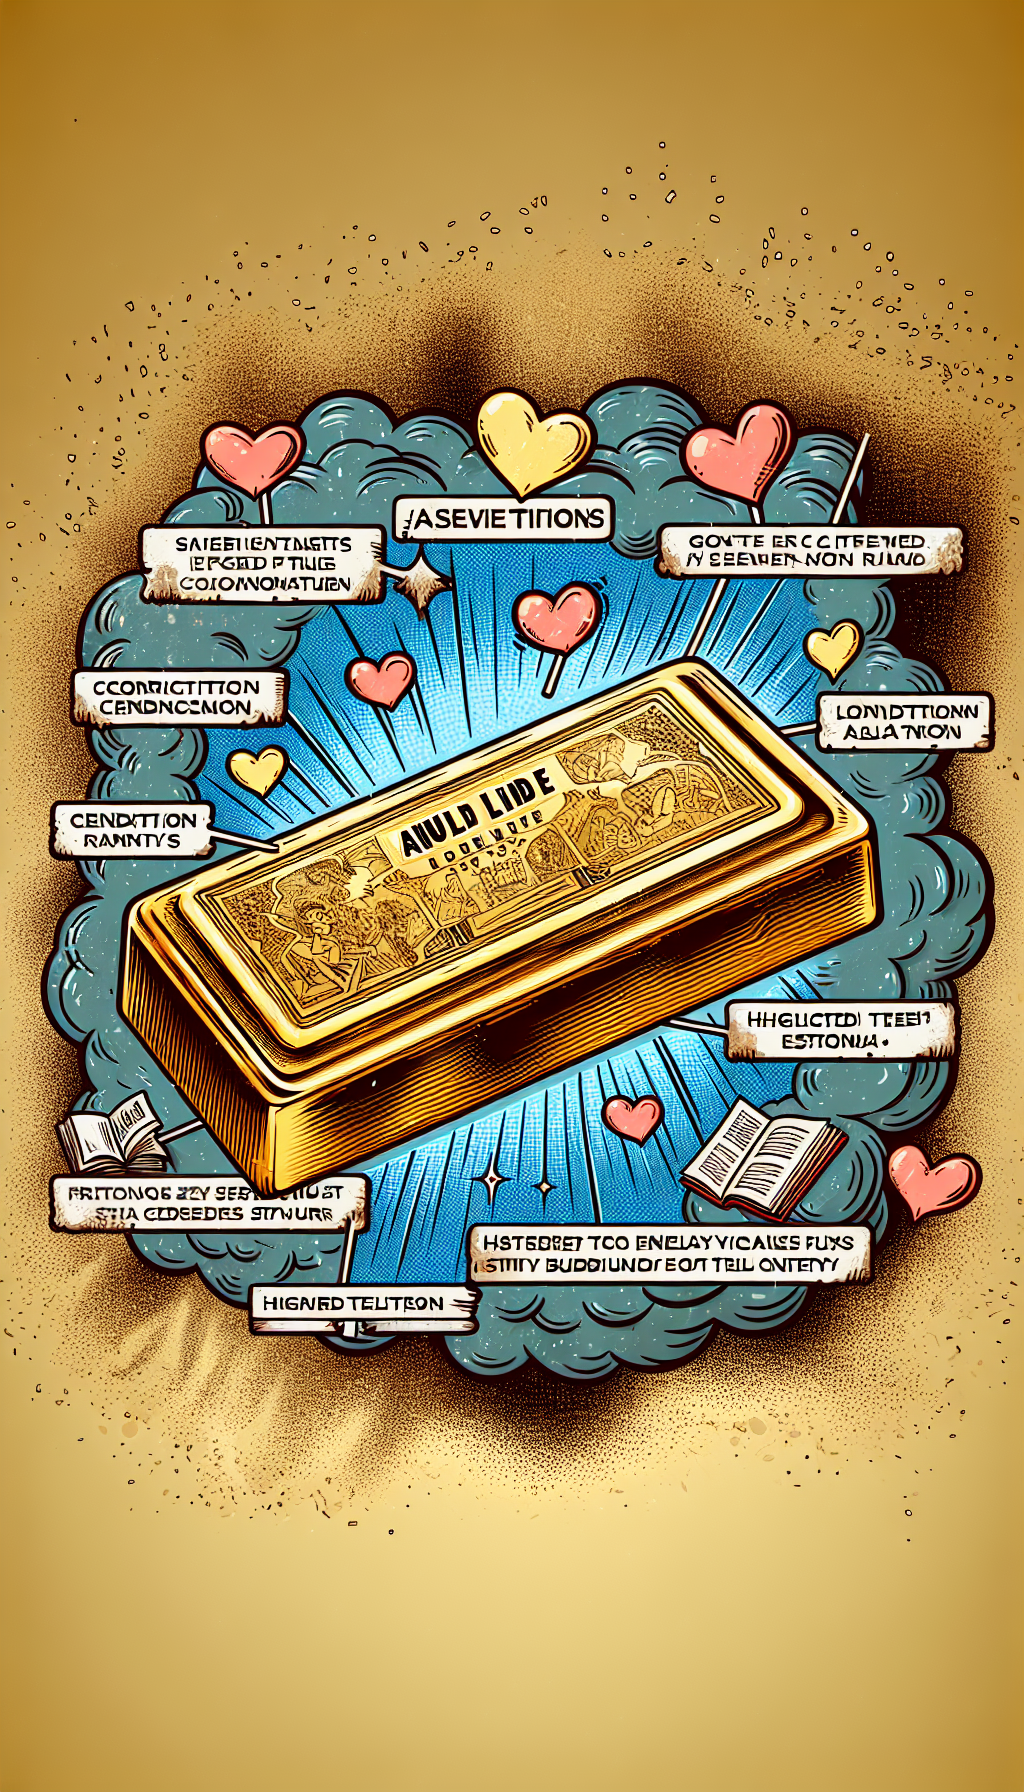 An animated dust cloud dissipates to reveal a gleaming, vintage Playboy magazine, with a reflective gold bar underneath and cartoon hearts floating above. Iconic factors like condition, rarity, and featured personalities are etched along the gold's edge, morphing from rough sketches to crisp lines, symbolizing the transformation from dusty to desirable, encapsulating the value of old Playboy editions.